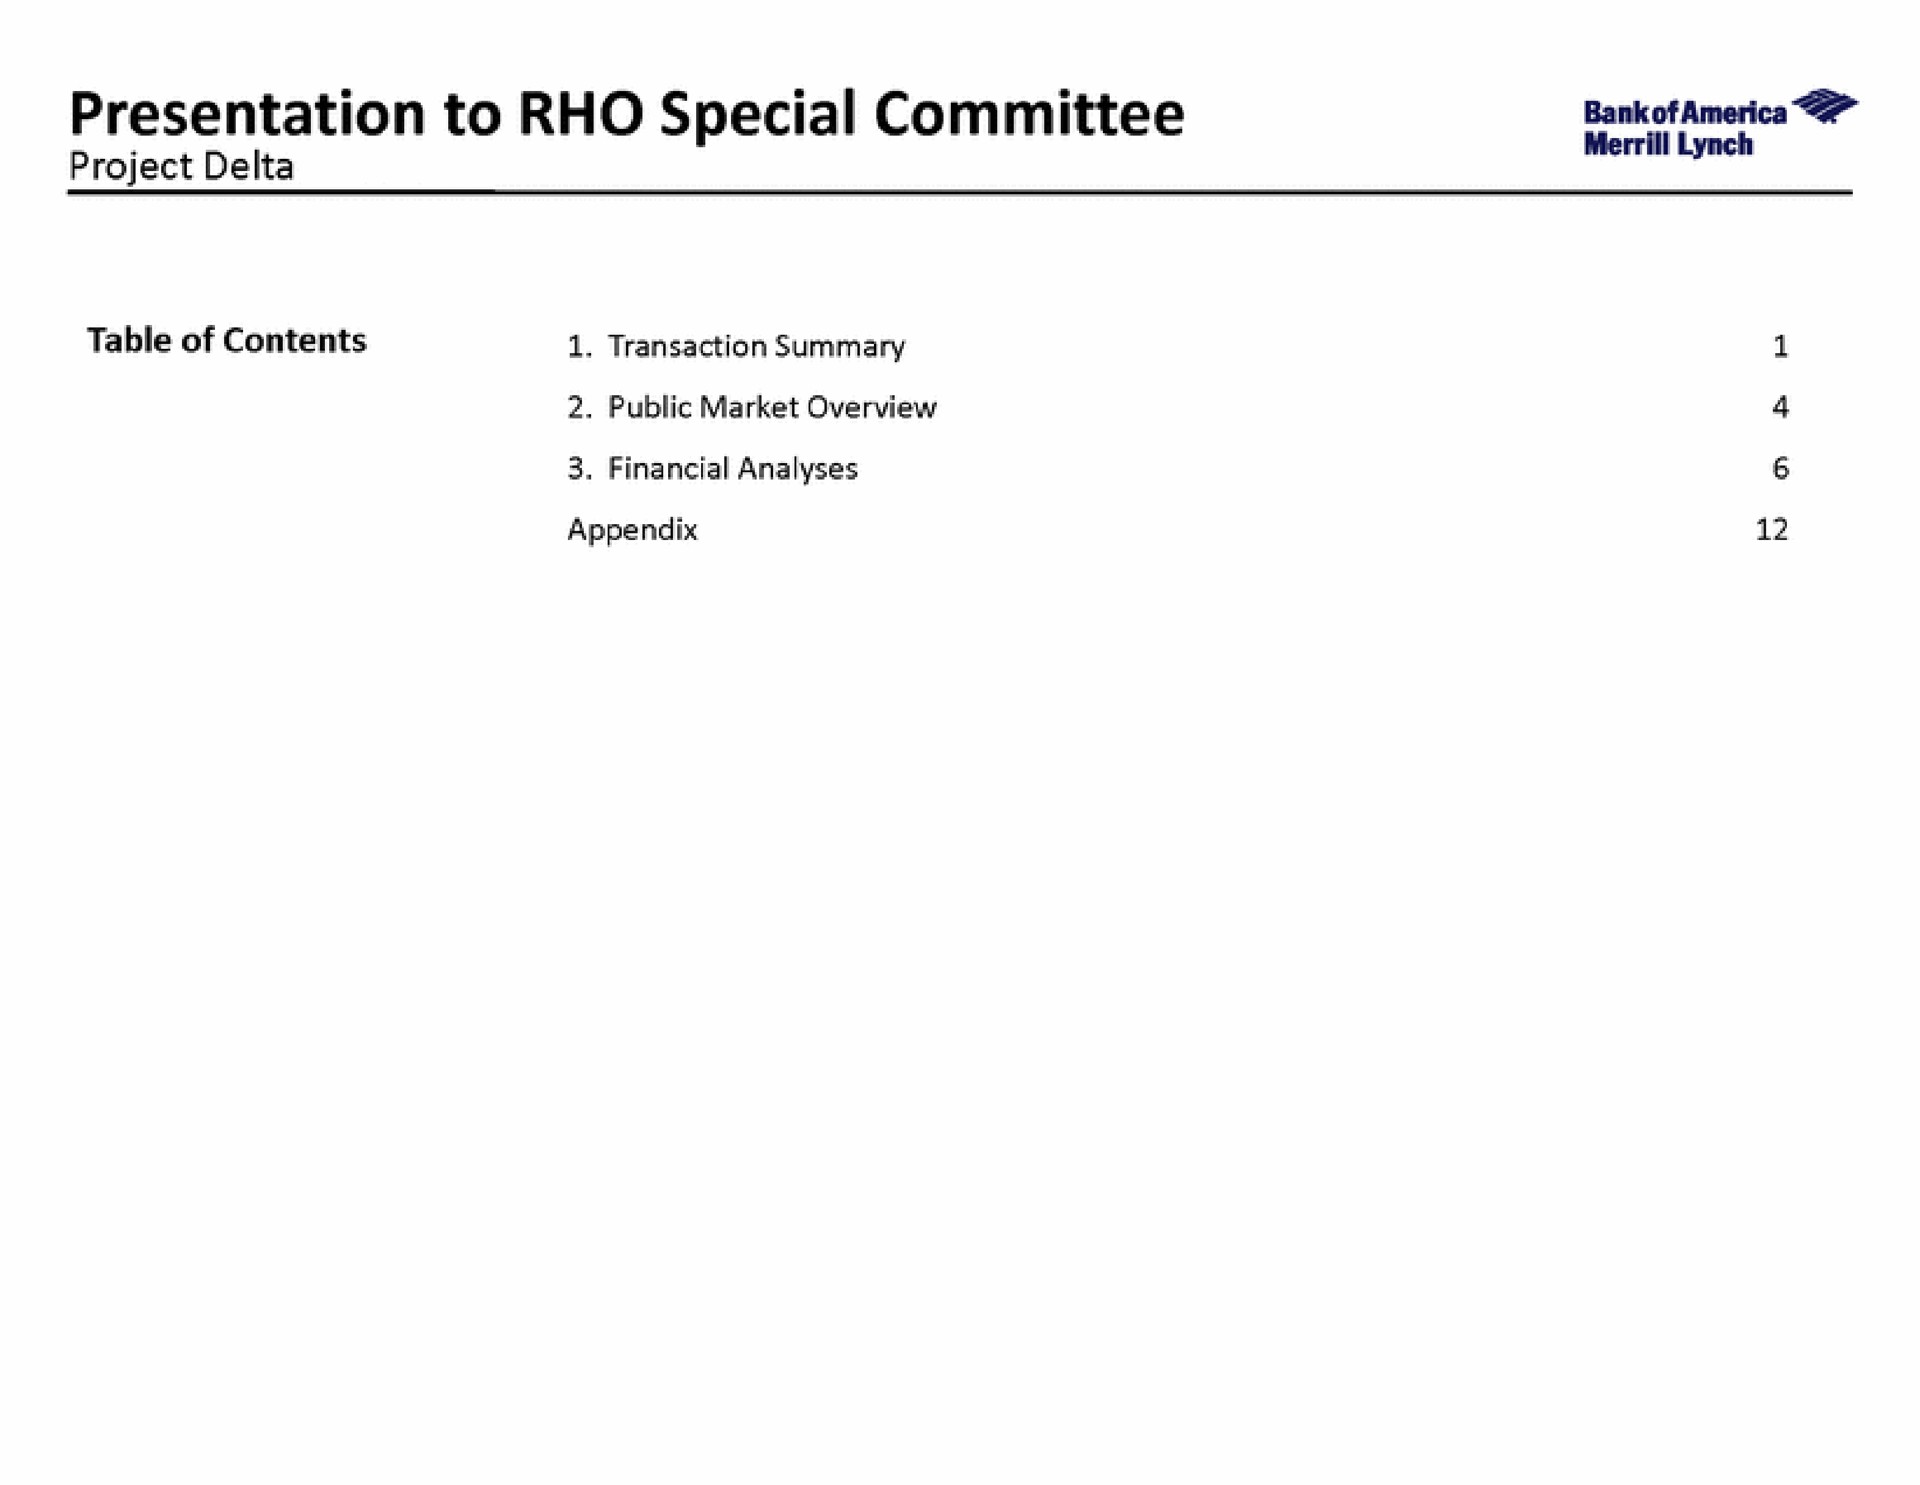 presentation to rho special committee project delta lynch | Bank of America